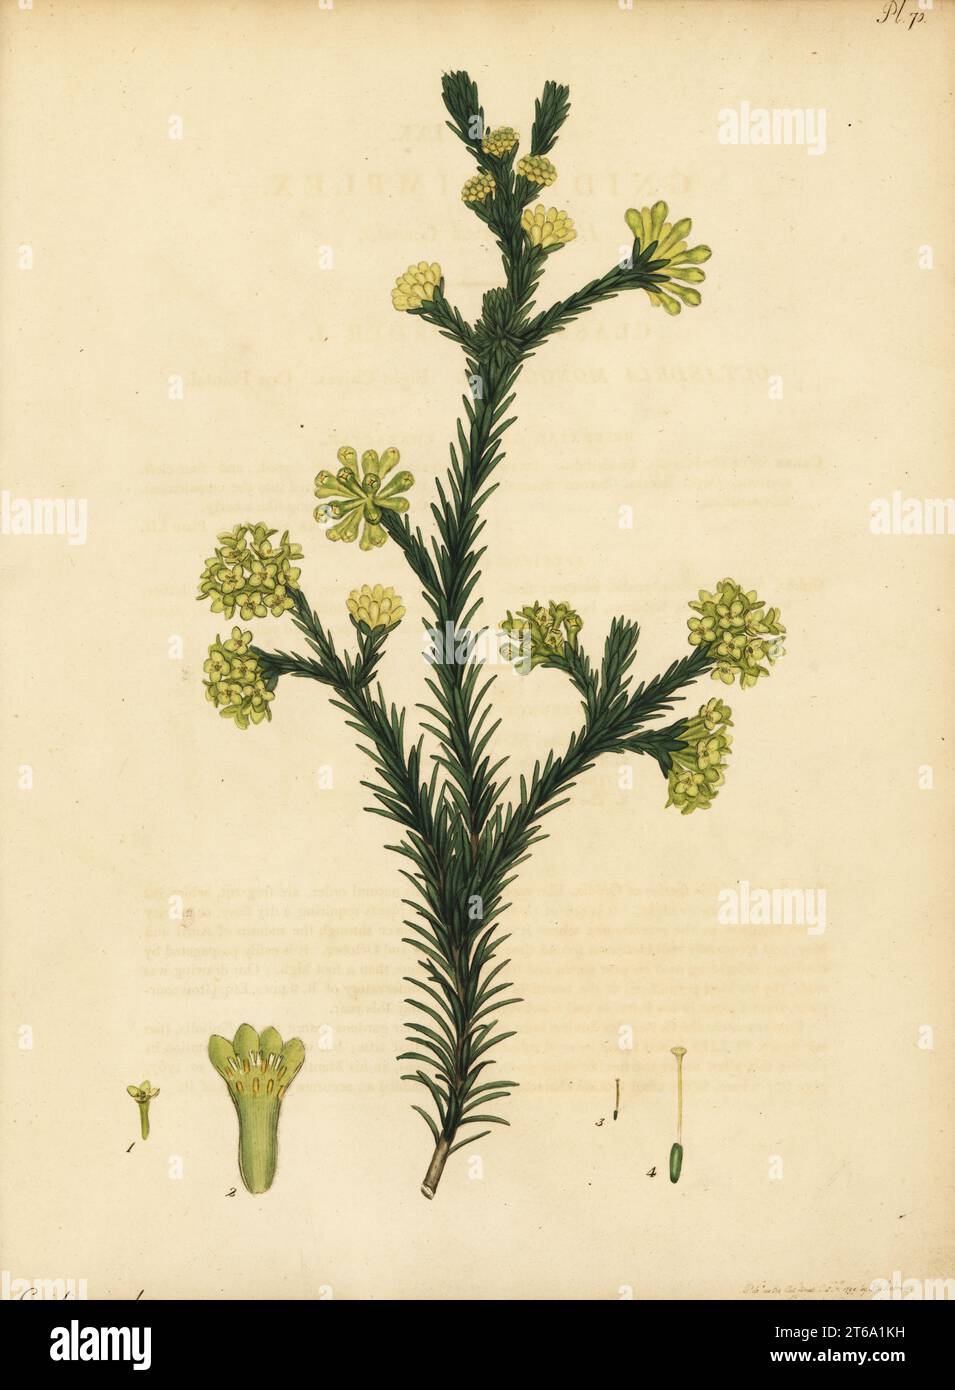 Gnidia juniperifolia, South Africa. Heath-leaved gnidia, Gnidia simplex. Copperplate engraving drawn, engraved and hand-coloured by Henry Andrews from his Botanical Register, Volume 1, published in London, 1799. Stock Photo